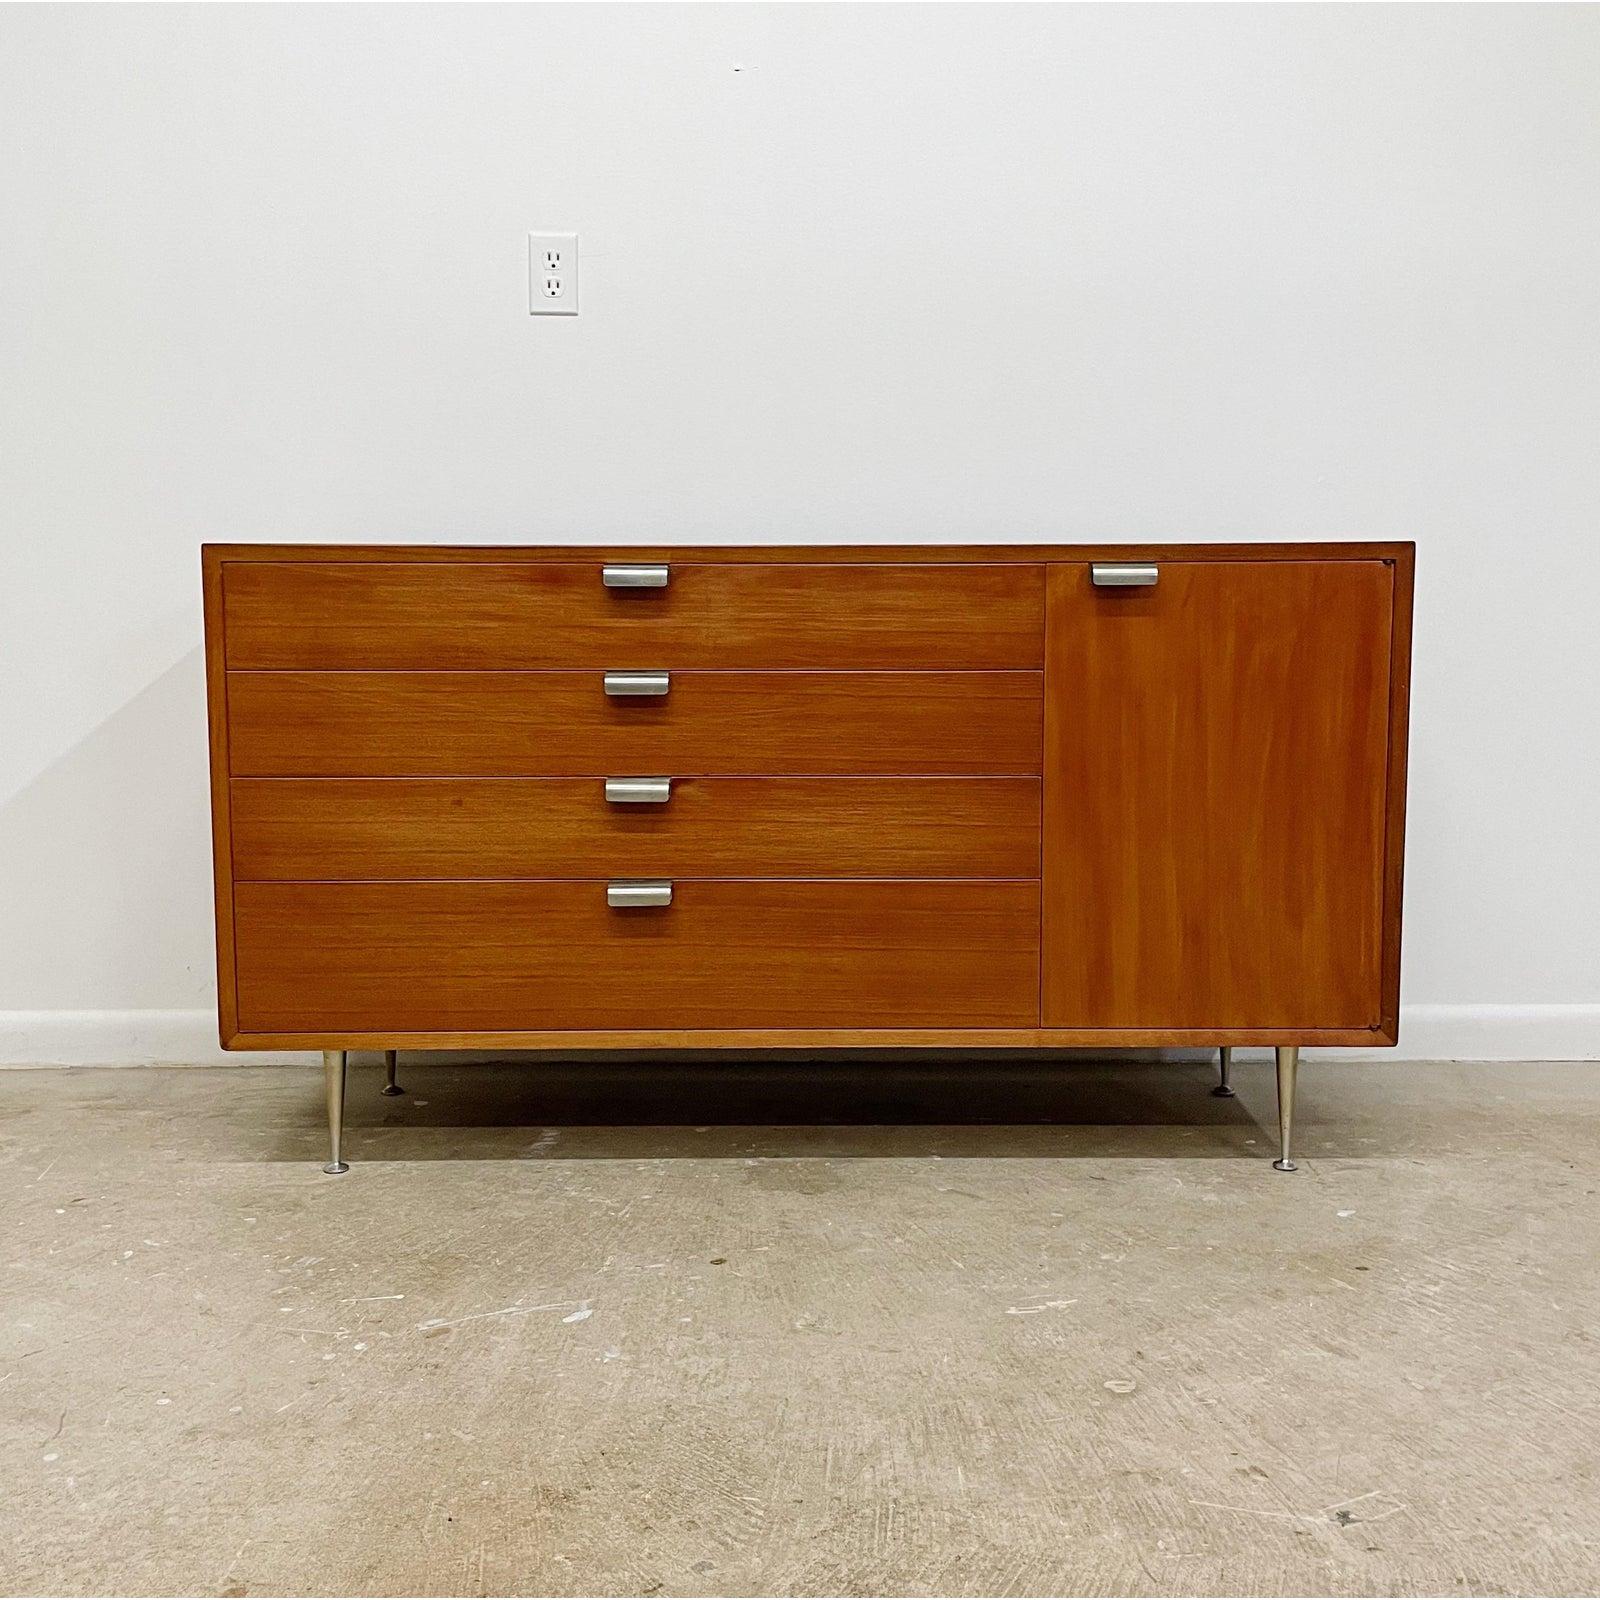 Classic, clean lines George Nelson for Herman Miller dresser or credenza with four deep dovetail drawers, and one side door with interior adjustable wood shelf. The hardware is brushed steel and the original custom ordered thin edge legs are brushed